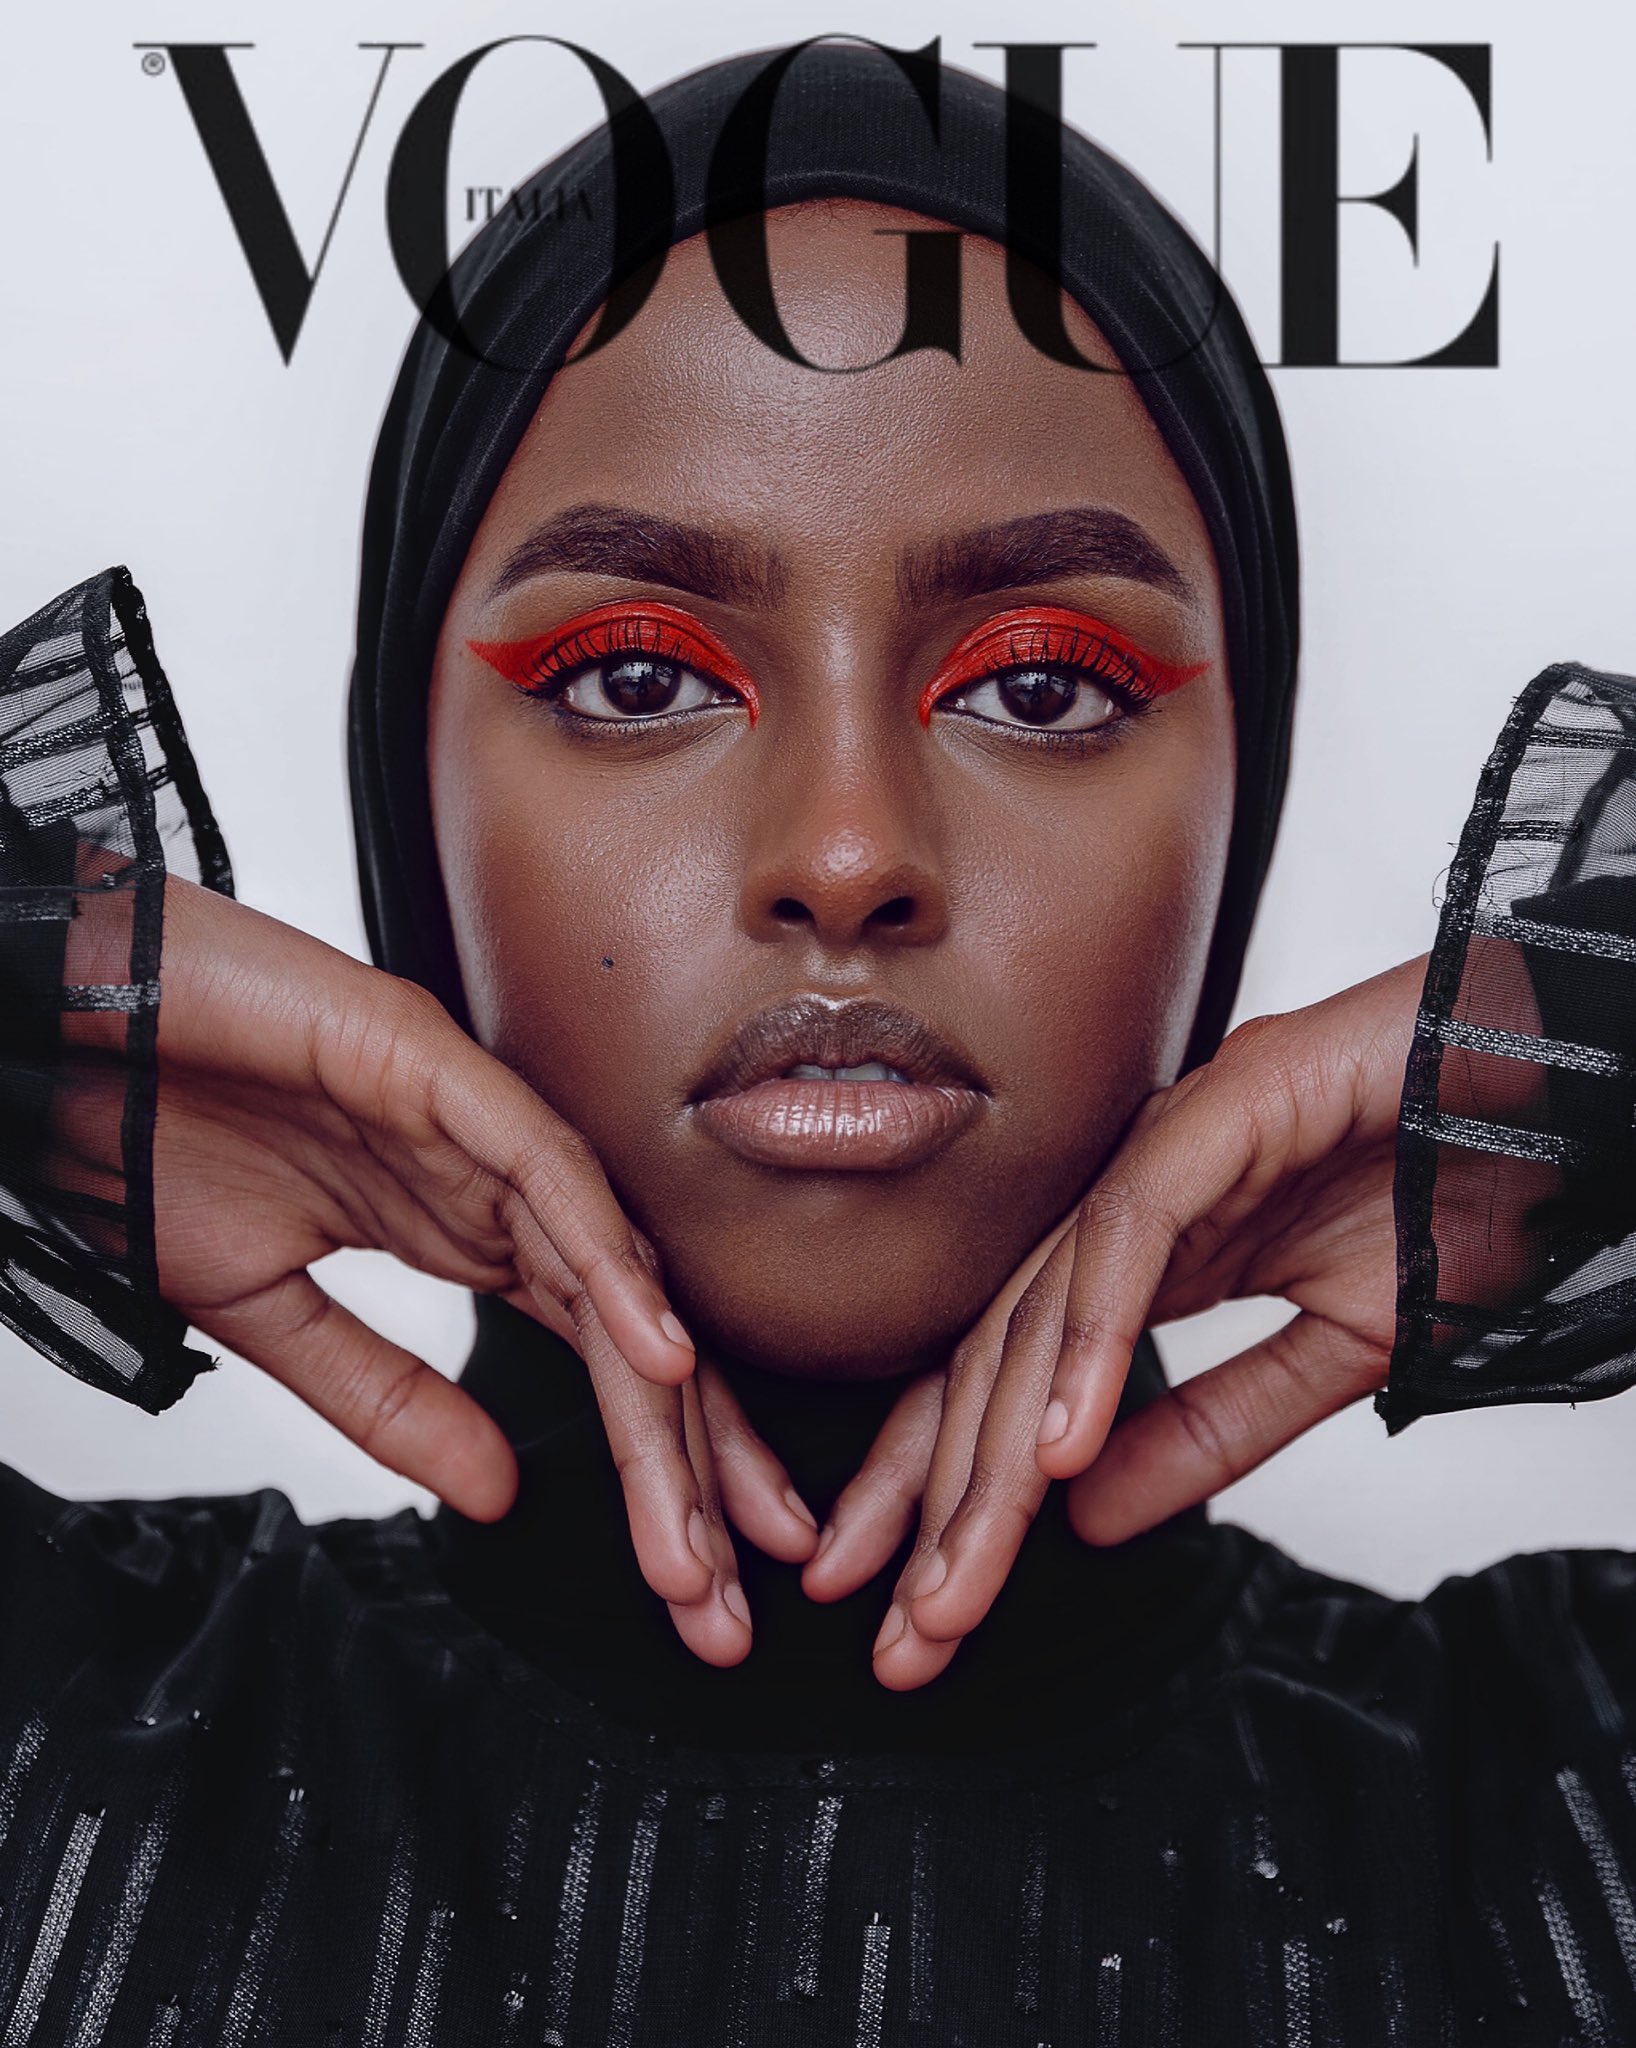 the-vogue-challenge-showcases-highlights-black-photographers-and-models